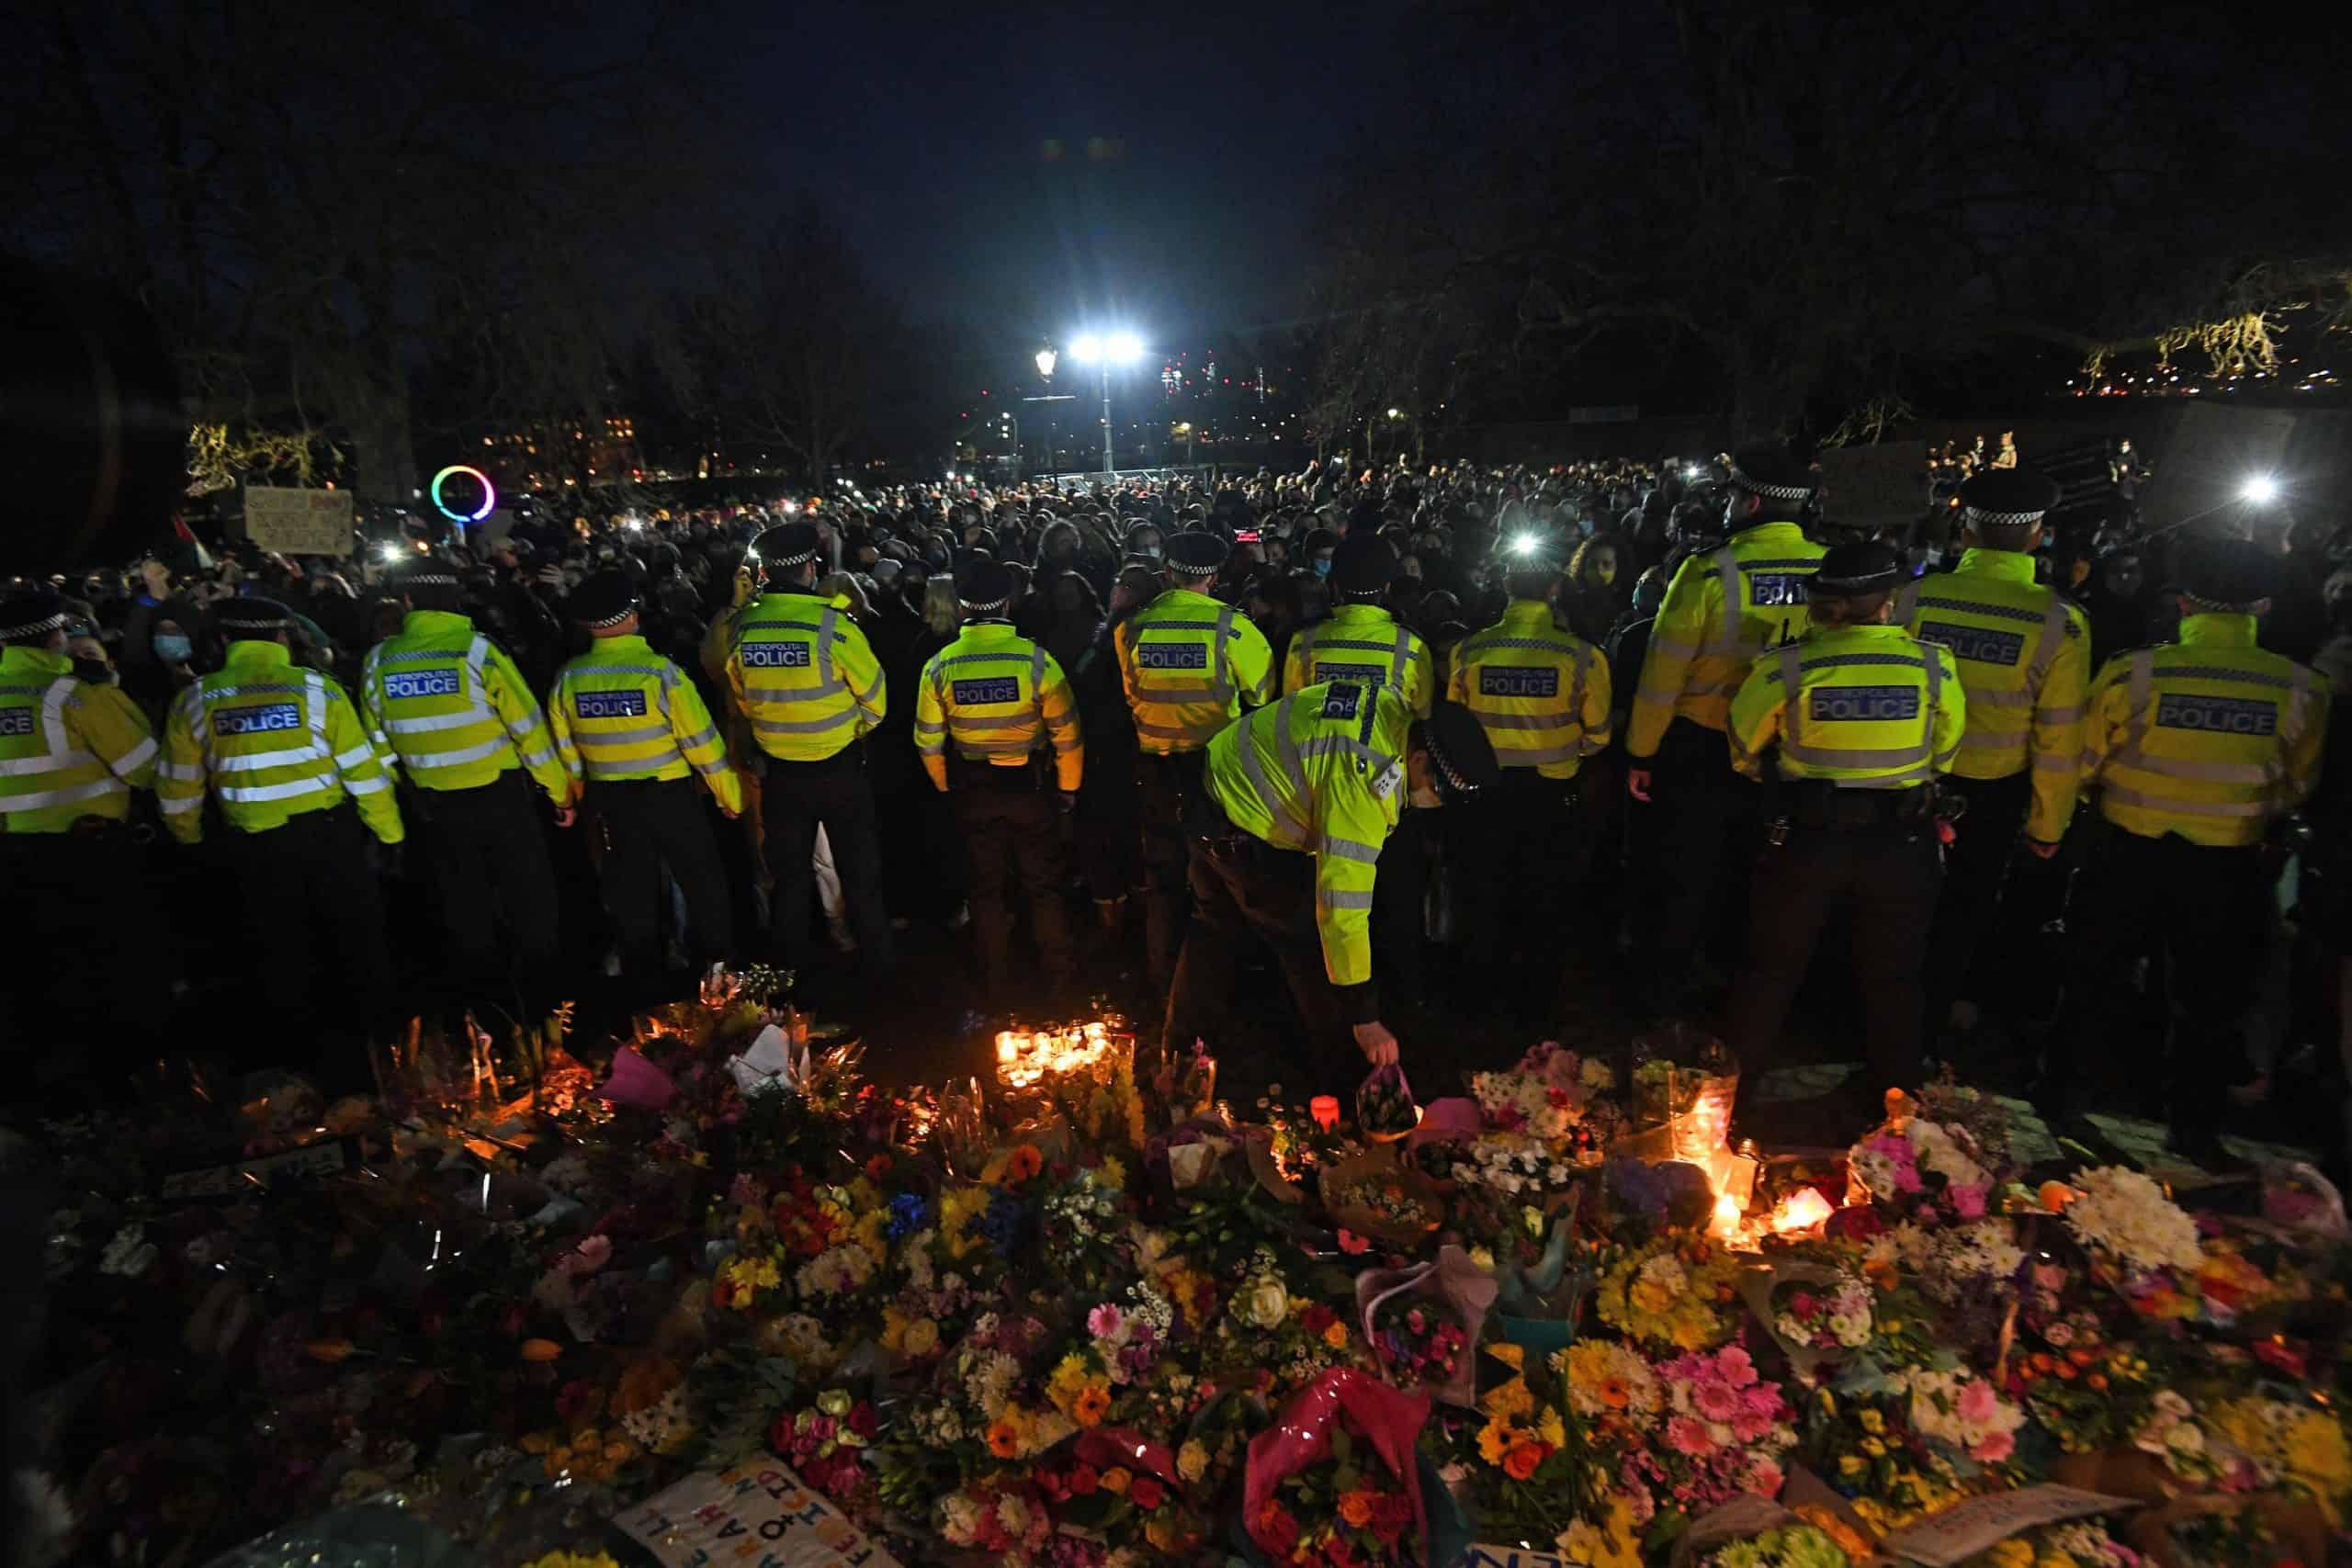 Cressida Dick claims ‘social media pile-on’ damaged confidence in police after Clapham vigil